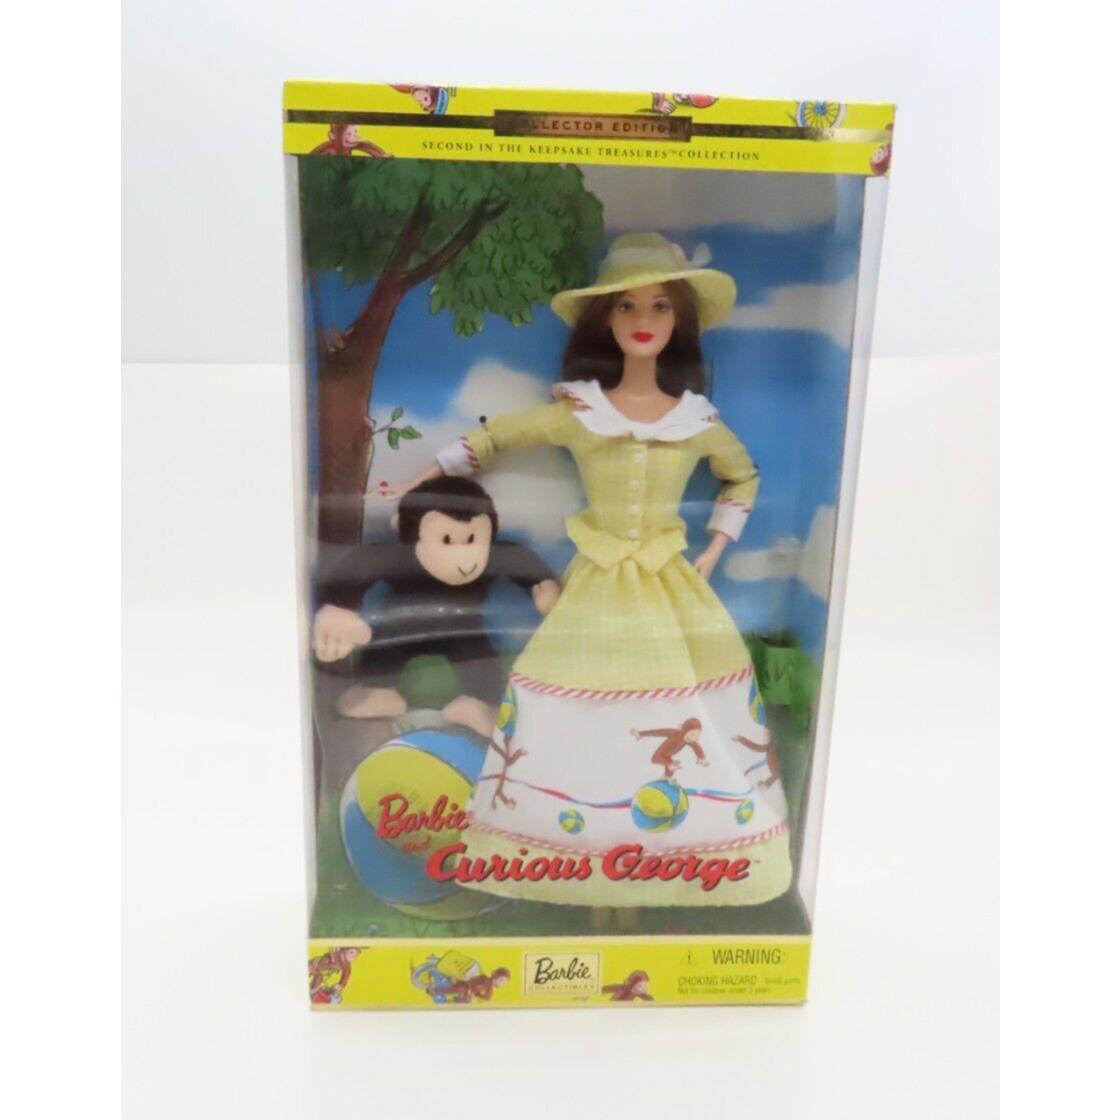 Barbie and Curious George Collector Edition 2000 Mattel 28798 Nrfb